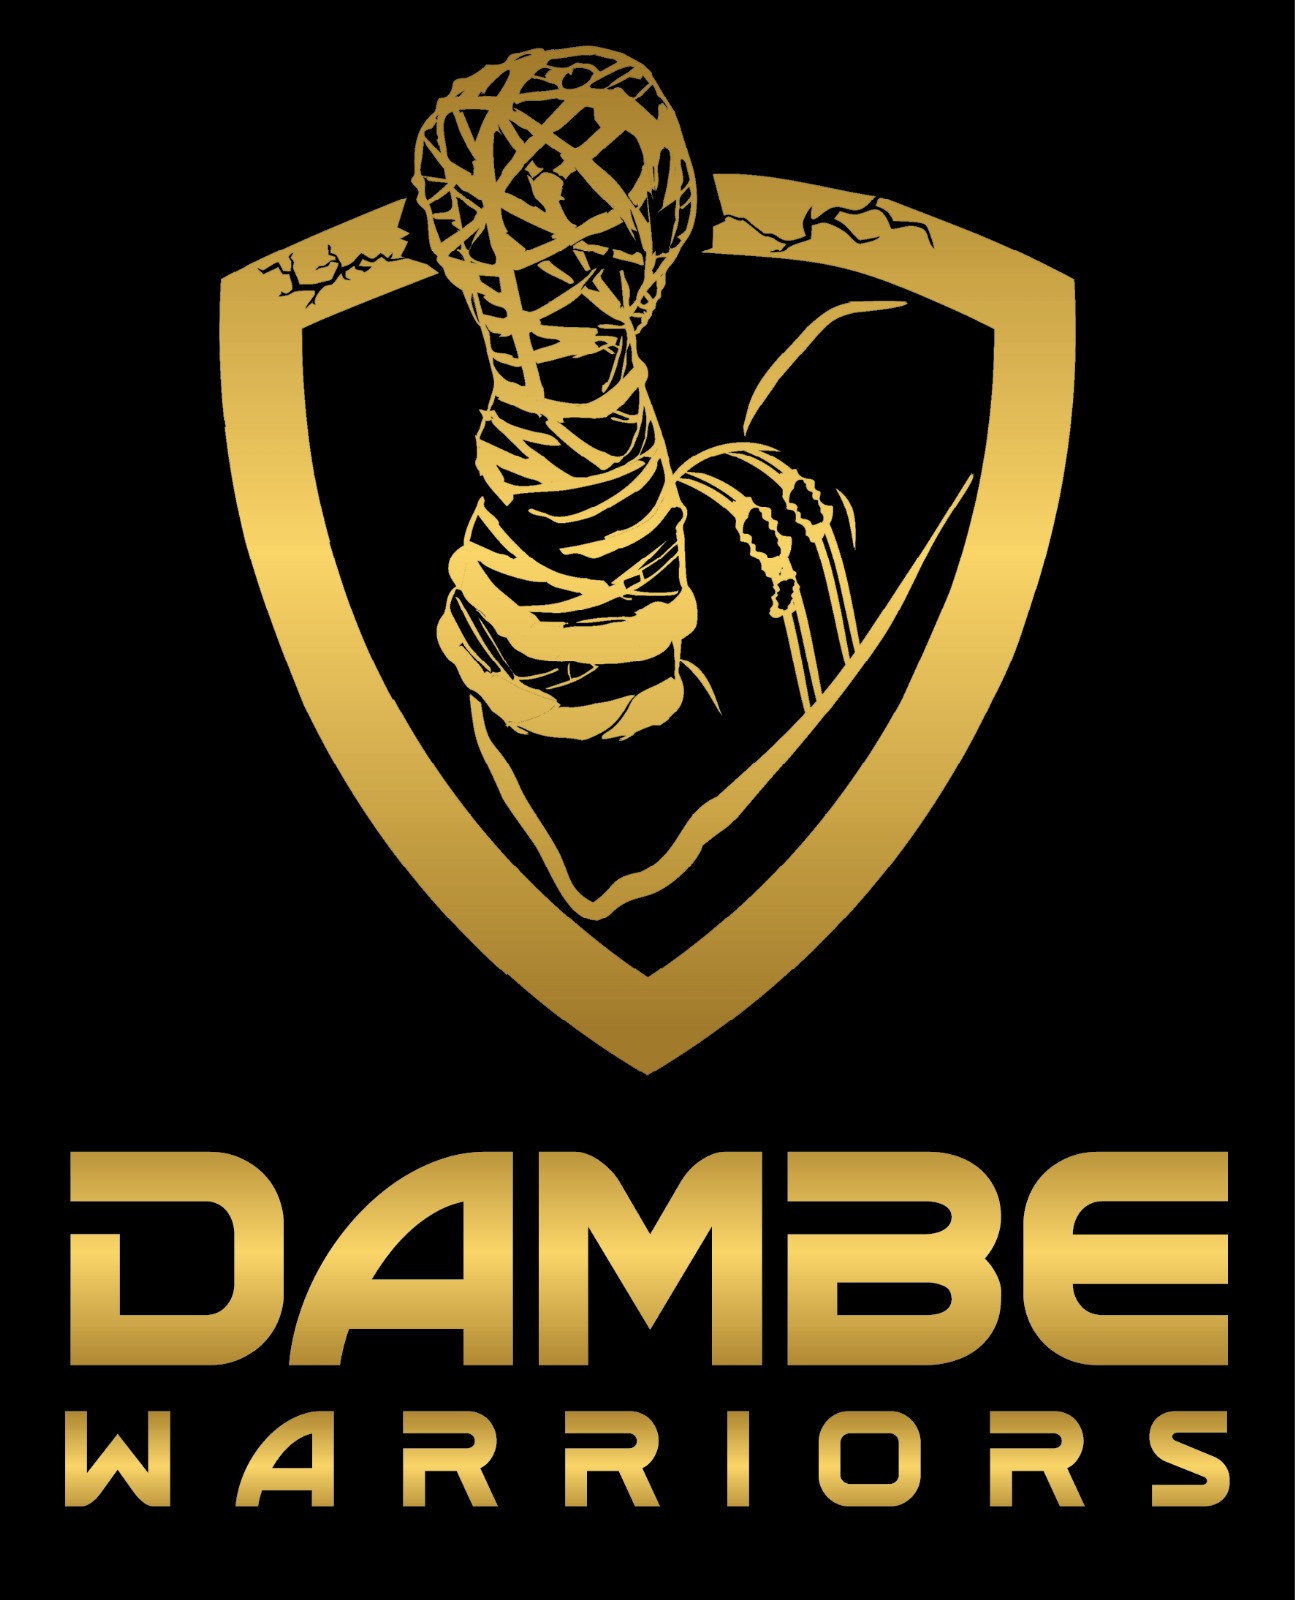 Dambe Warriors League (DWL) SuperFight 01 Amazes Largest Crowd Ever as Season 02 Launch is Announced